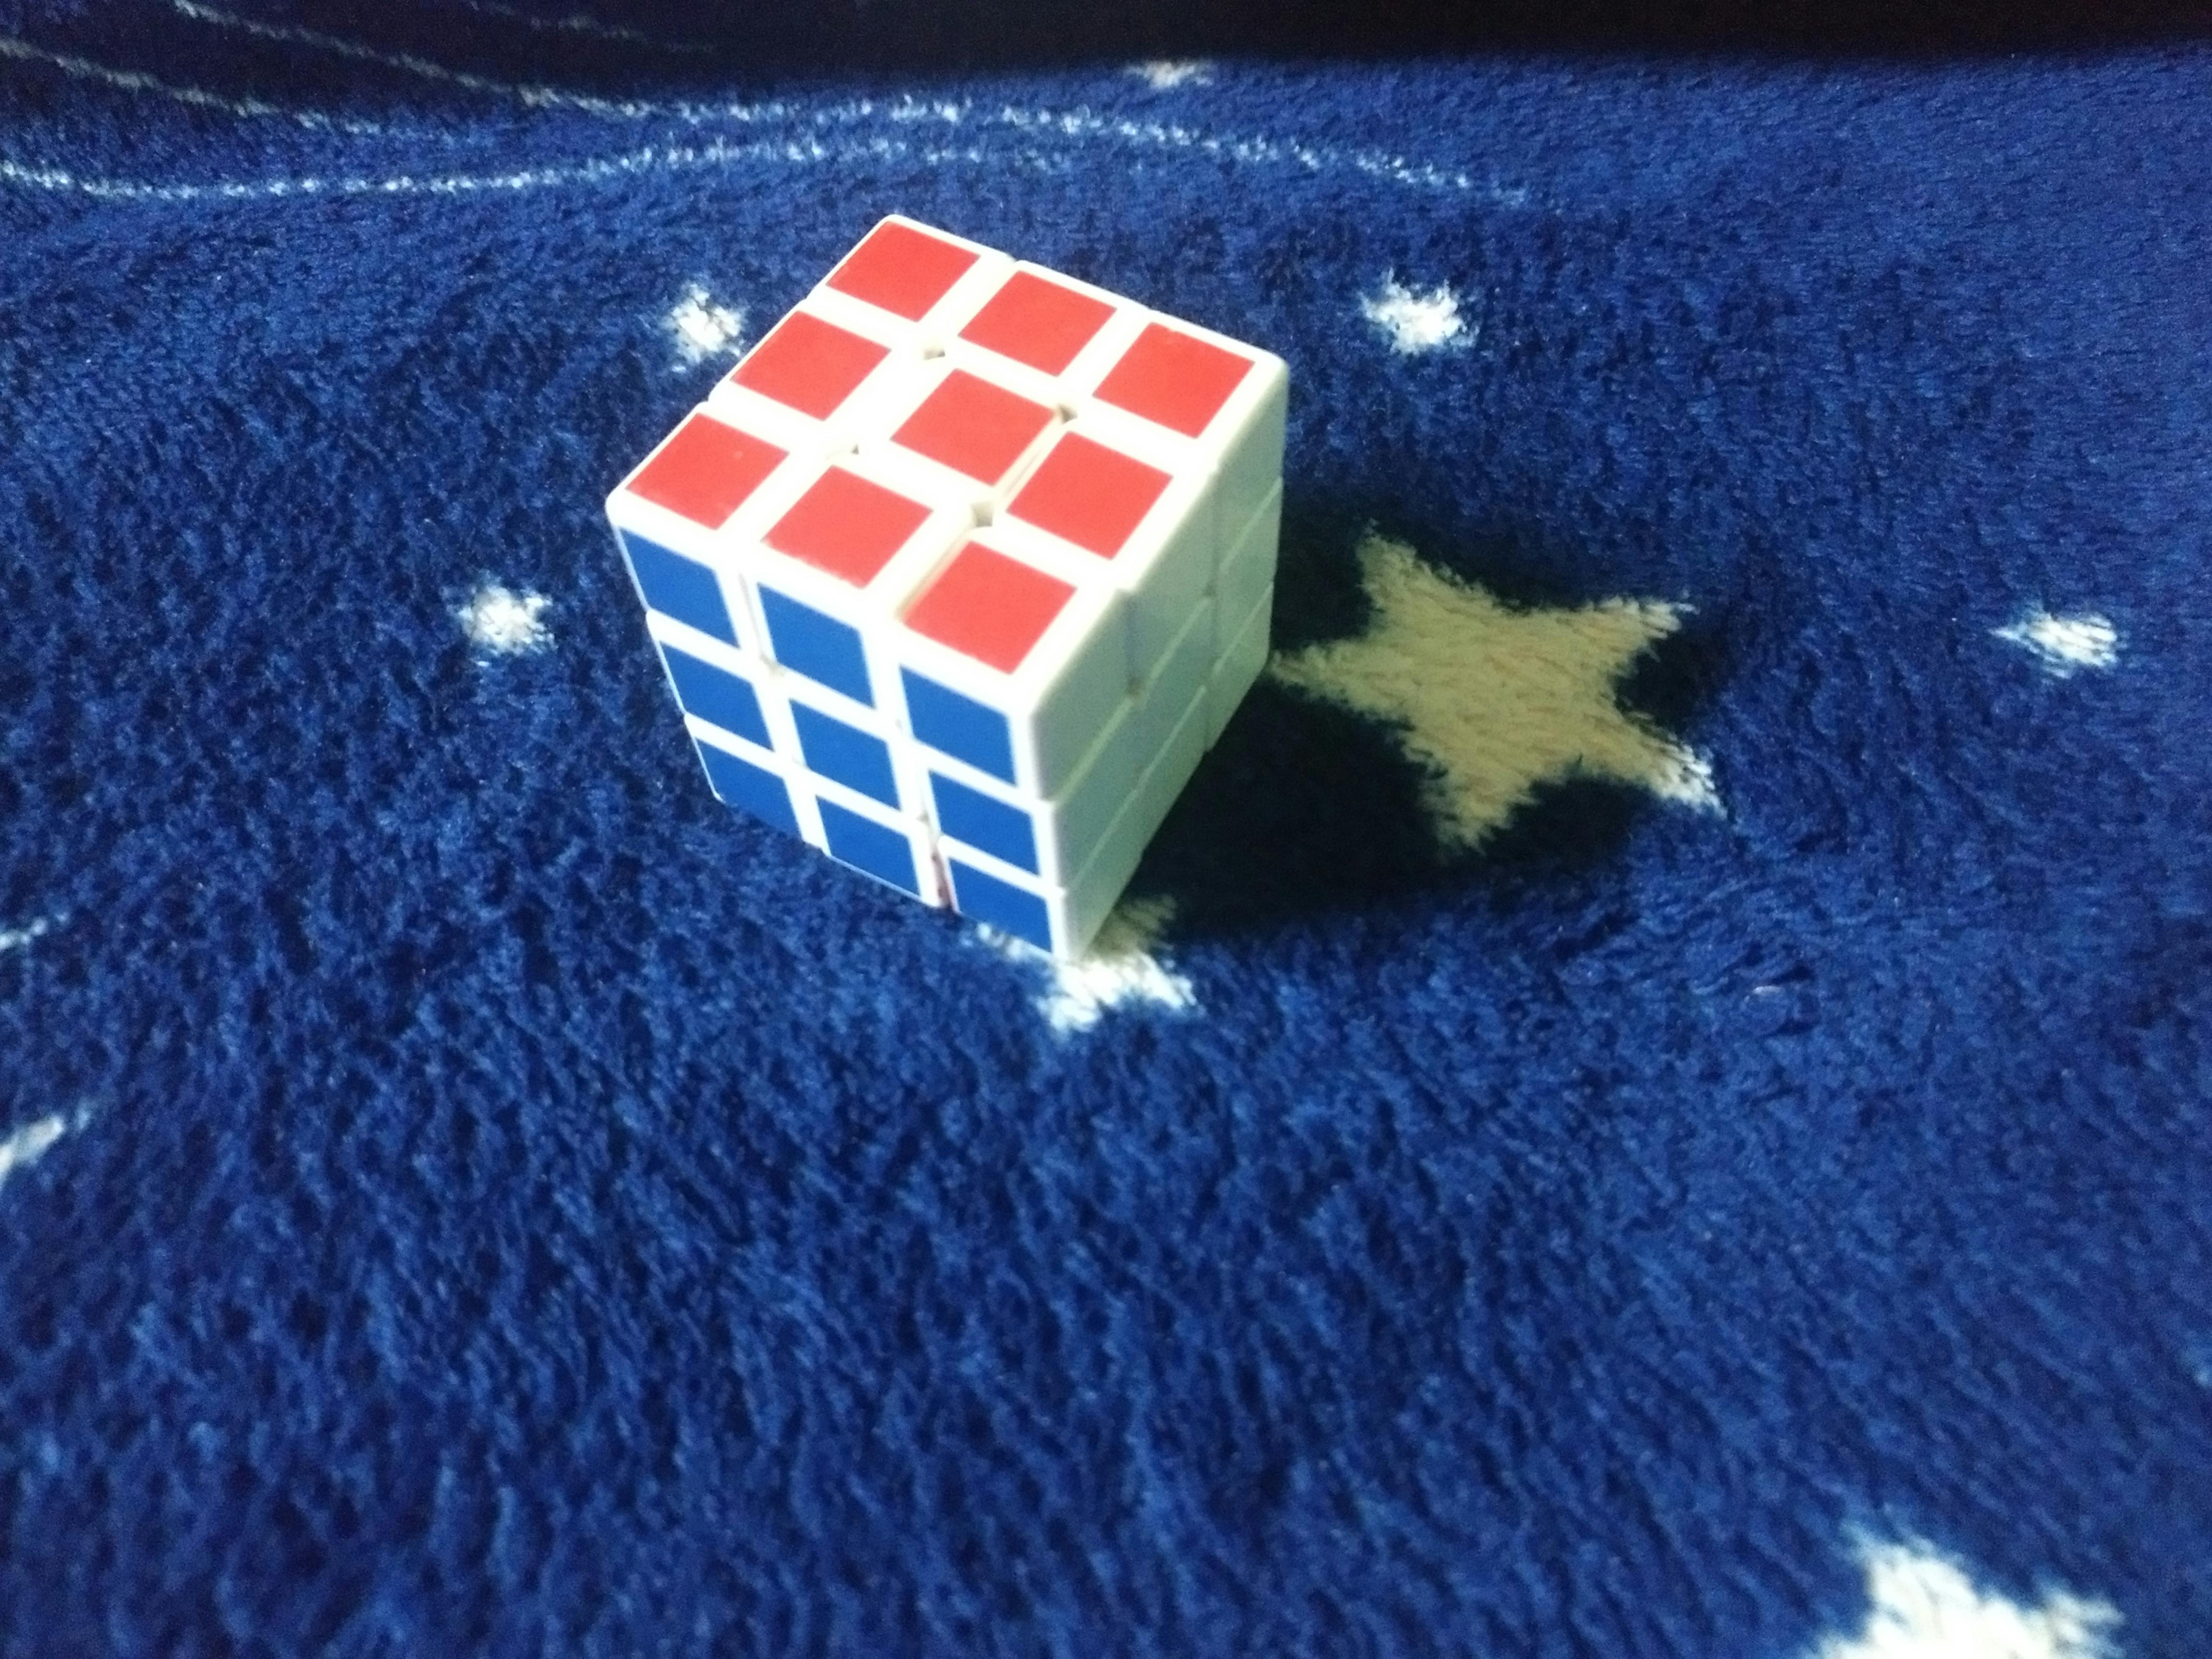 Free stock photo of #rubik\'s_cube #cube #blue #red #white #three_colou